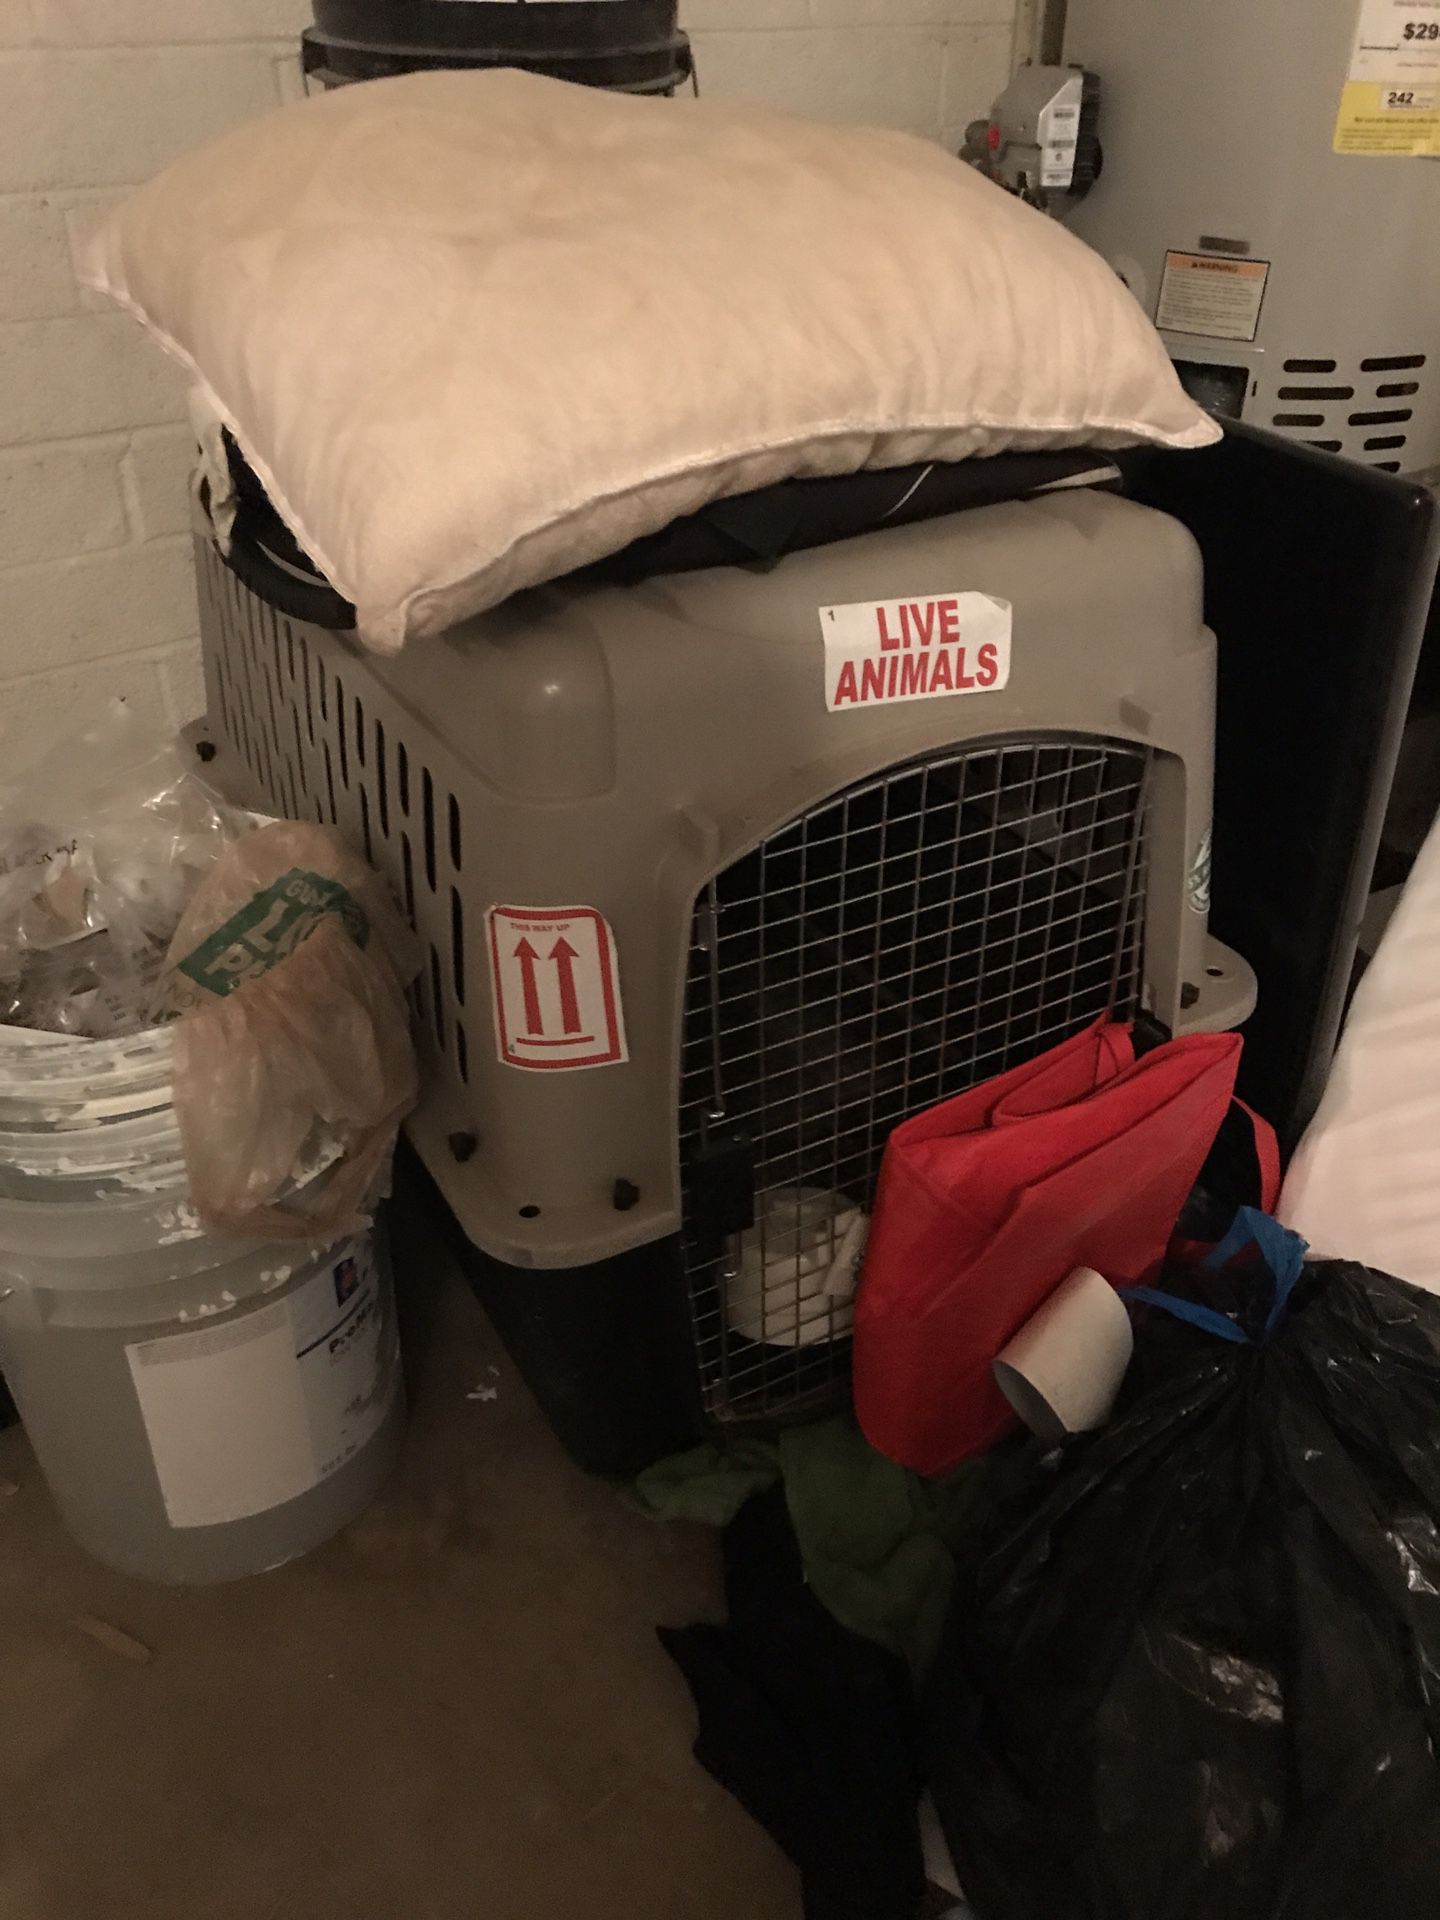 Kong dog crate, other crate, twin mattress FOR THE LOW